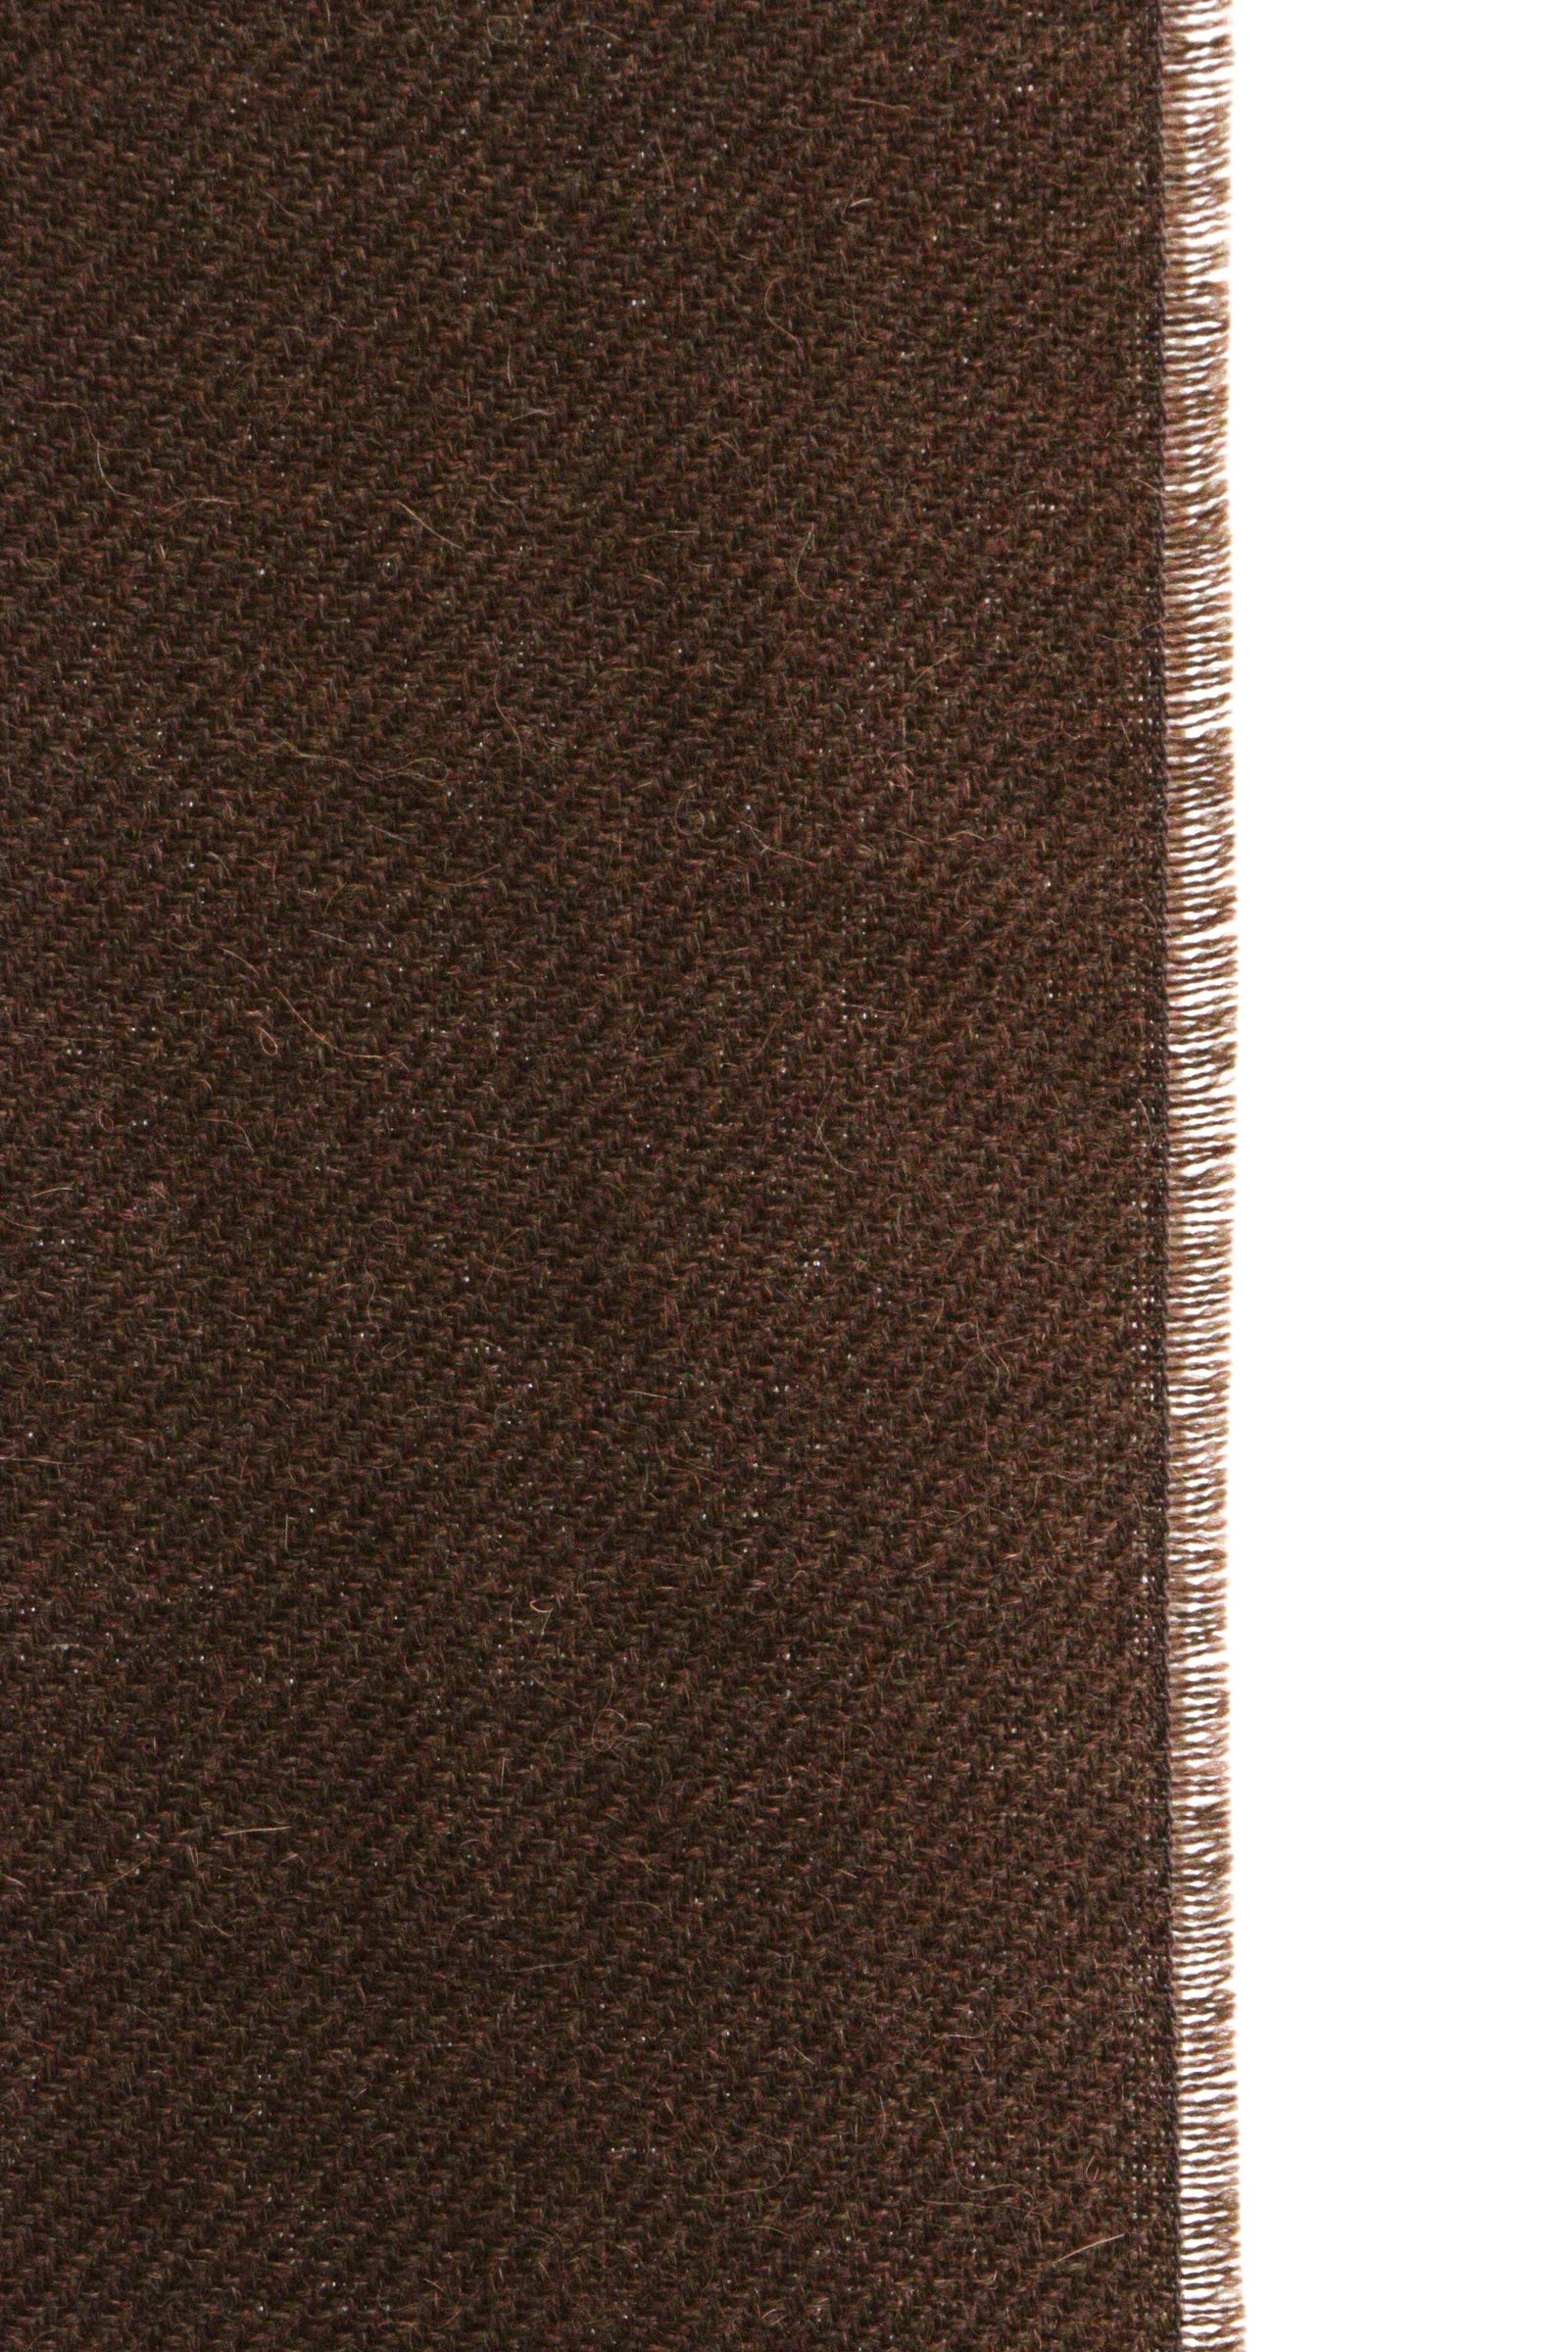 THE INOUE BROTHERS - Non Brushed Large Stole Brown / 大判ストール 